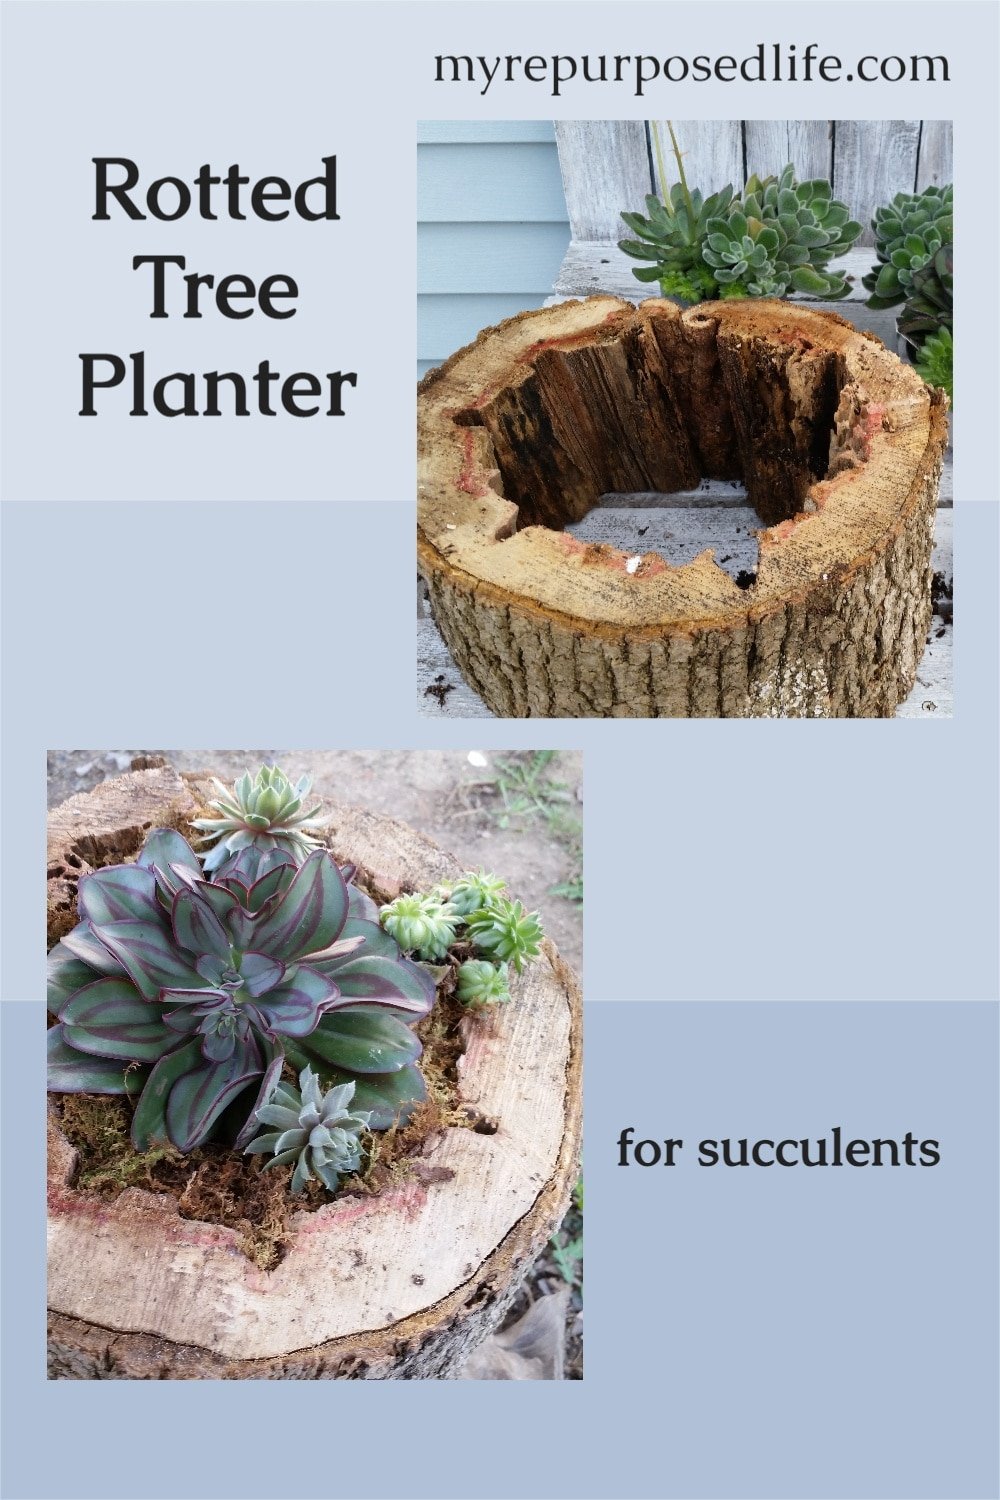 Make unique succulent planters out of old and rotted tree trunks. Tree stumps and wood slices that are rotten are perfect for planting succulents. #MyRepurposedLife #succulents #planter #diy #tree #trunk #stump via @repurposedlife